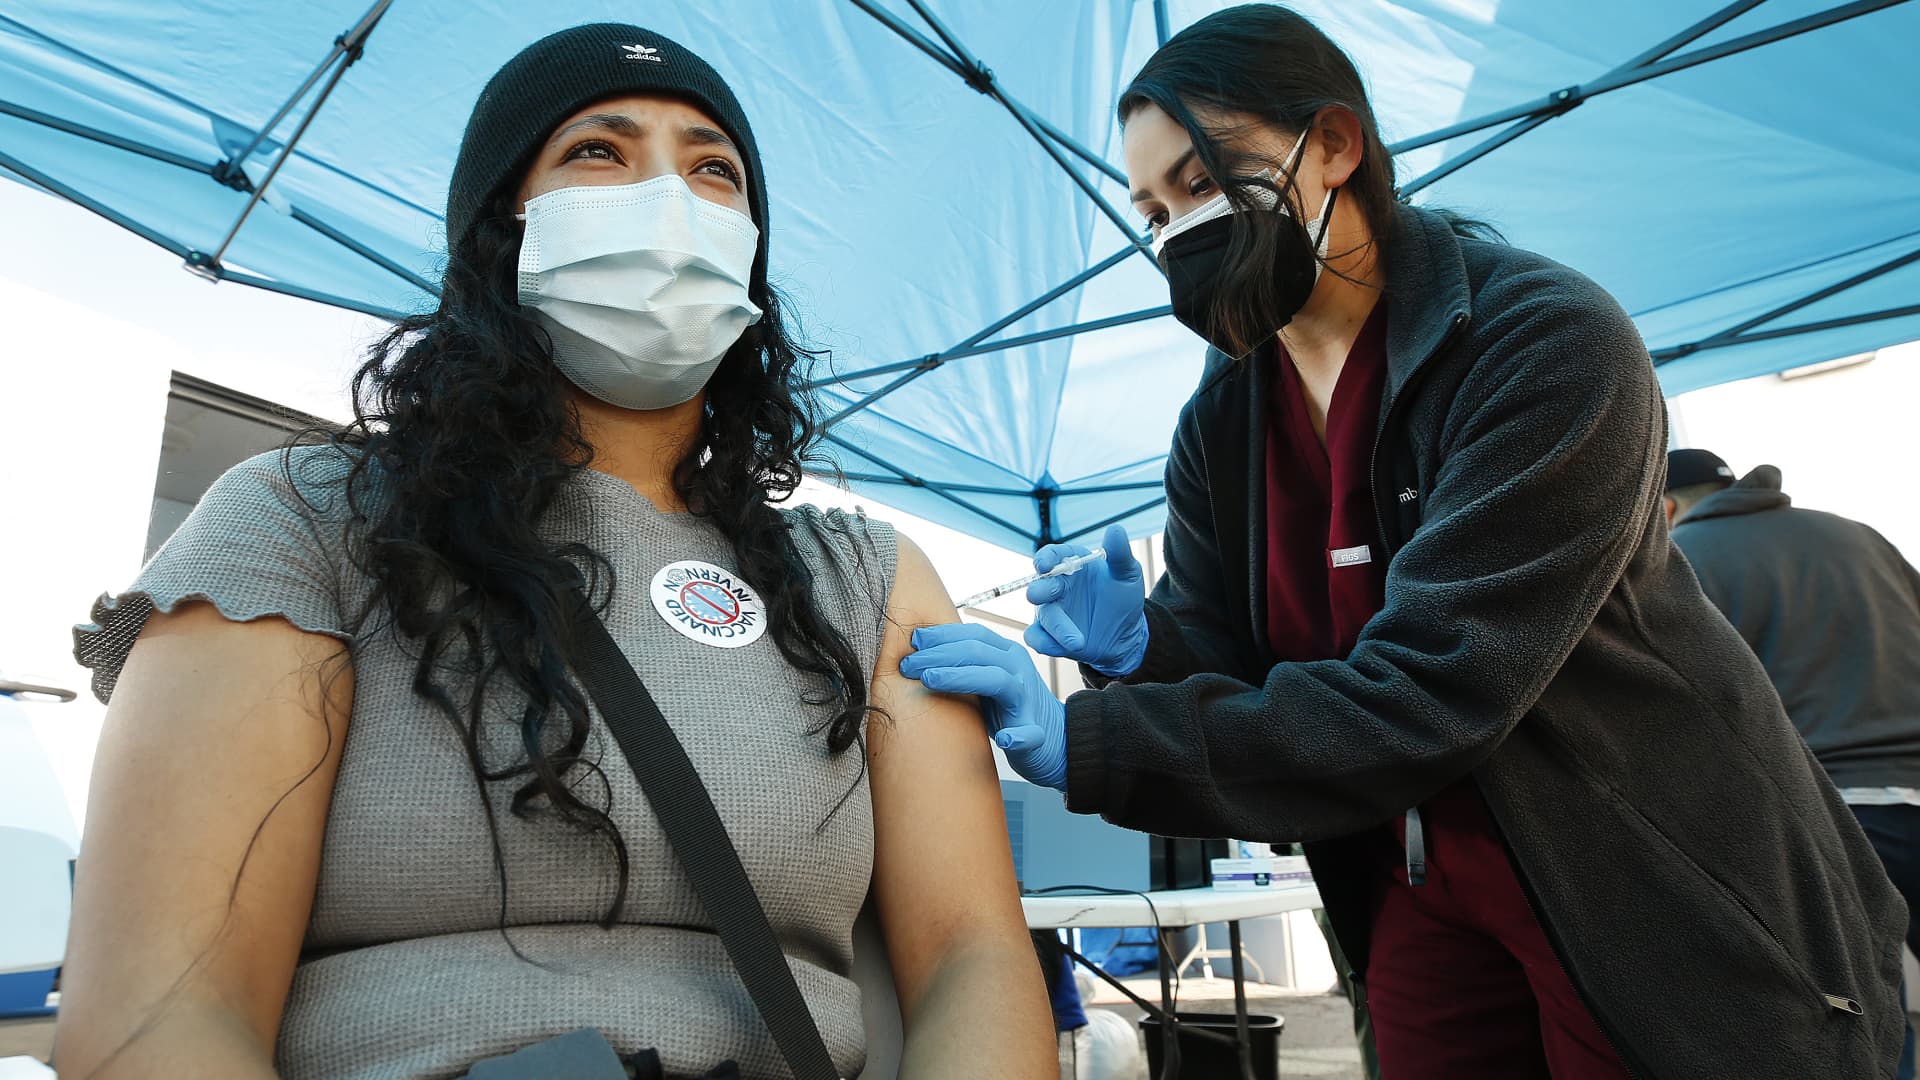 Elizabeth Raygoza gets her Pfizer vaccine shot, March 17, 2021, from Physician Assistant-Certified Alyssa Hernandez as the city of Vernon Health Department staff used the city's new mobile health unit clinic to administer COVID-19 vaccinations to nearly 250 essential food processing workers at Rose & Shore, a major, locally-based prepared foods products producer that serves supermarkets, schools, restaurants, airlines and others.